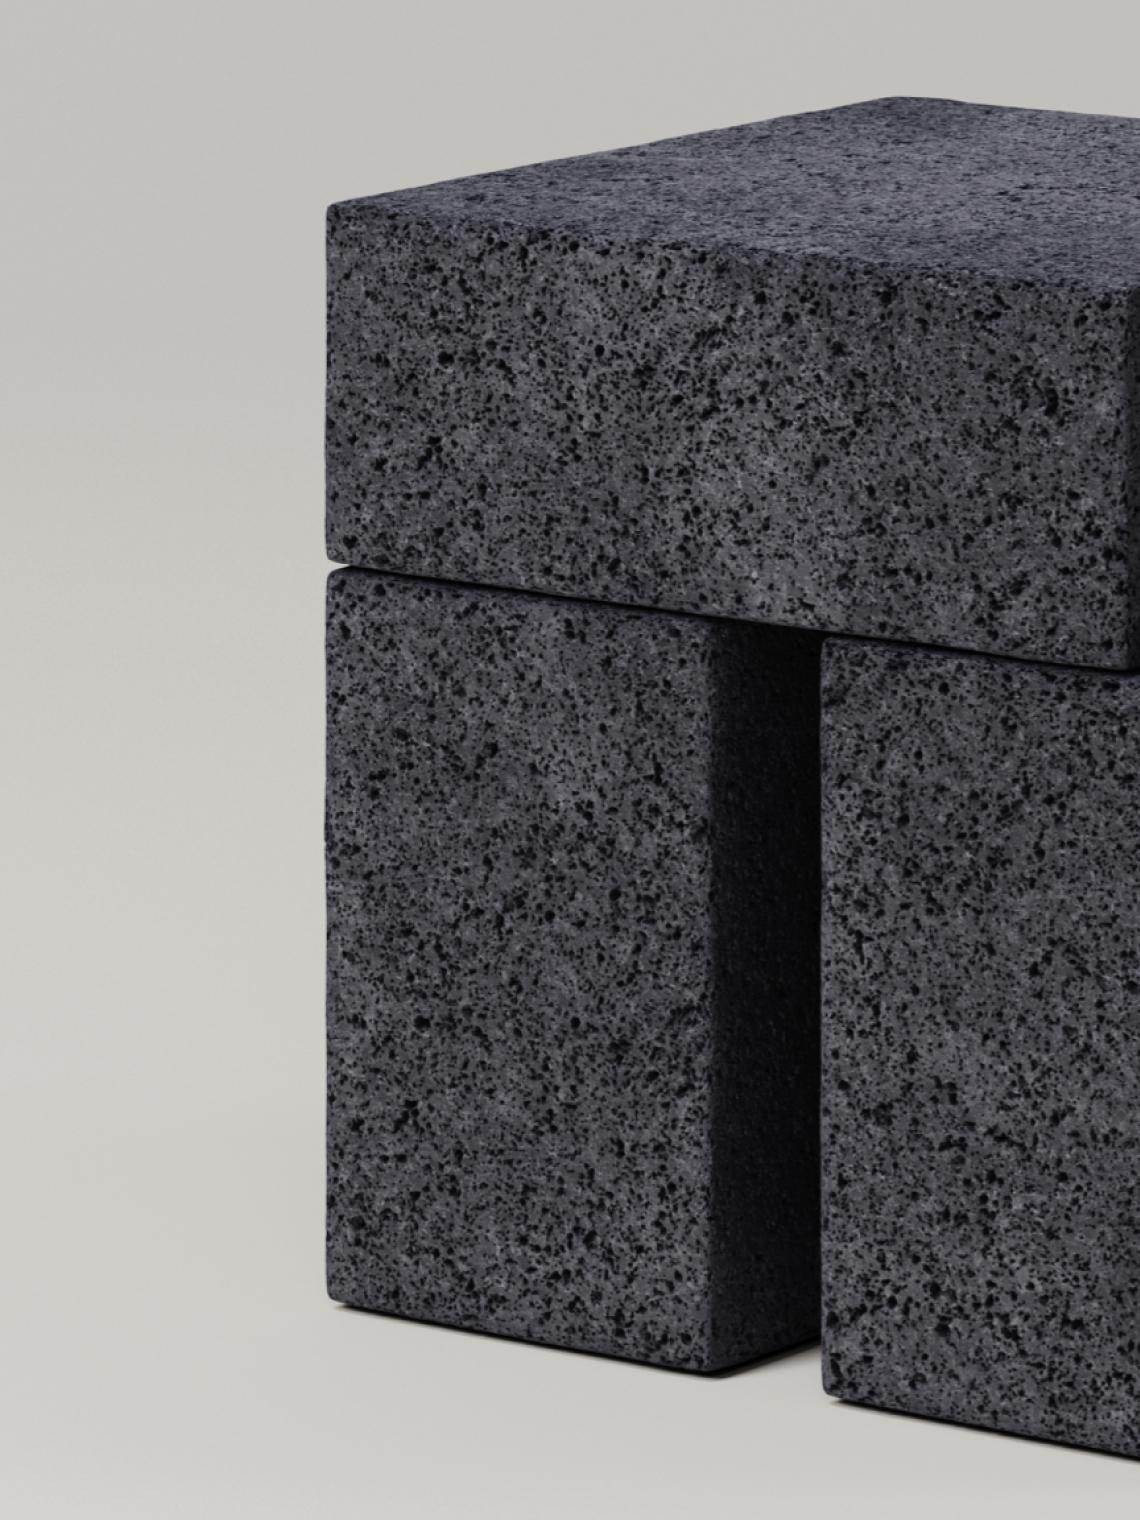 The M_009 Side Table is a simple yet sophisticated brutalist design. Consisting of one stone, resting atop two blocks its sculptural form is a soft balance of form and function. 

Suitable for both indoor and outdoor use.  

NYC-based design studio